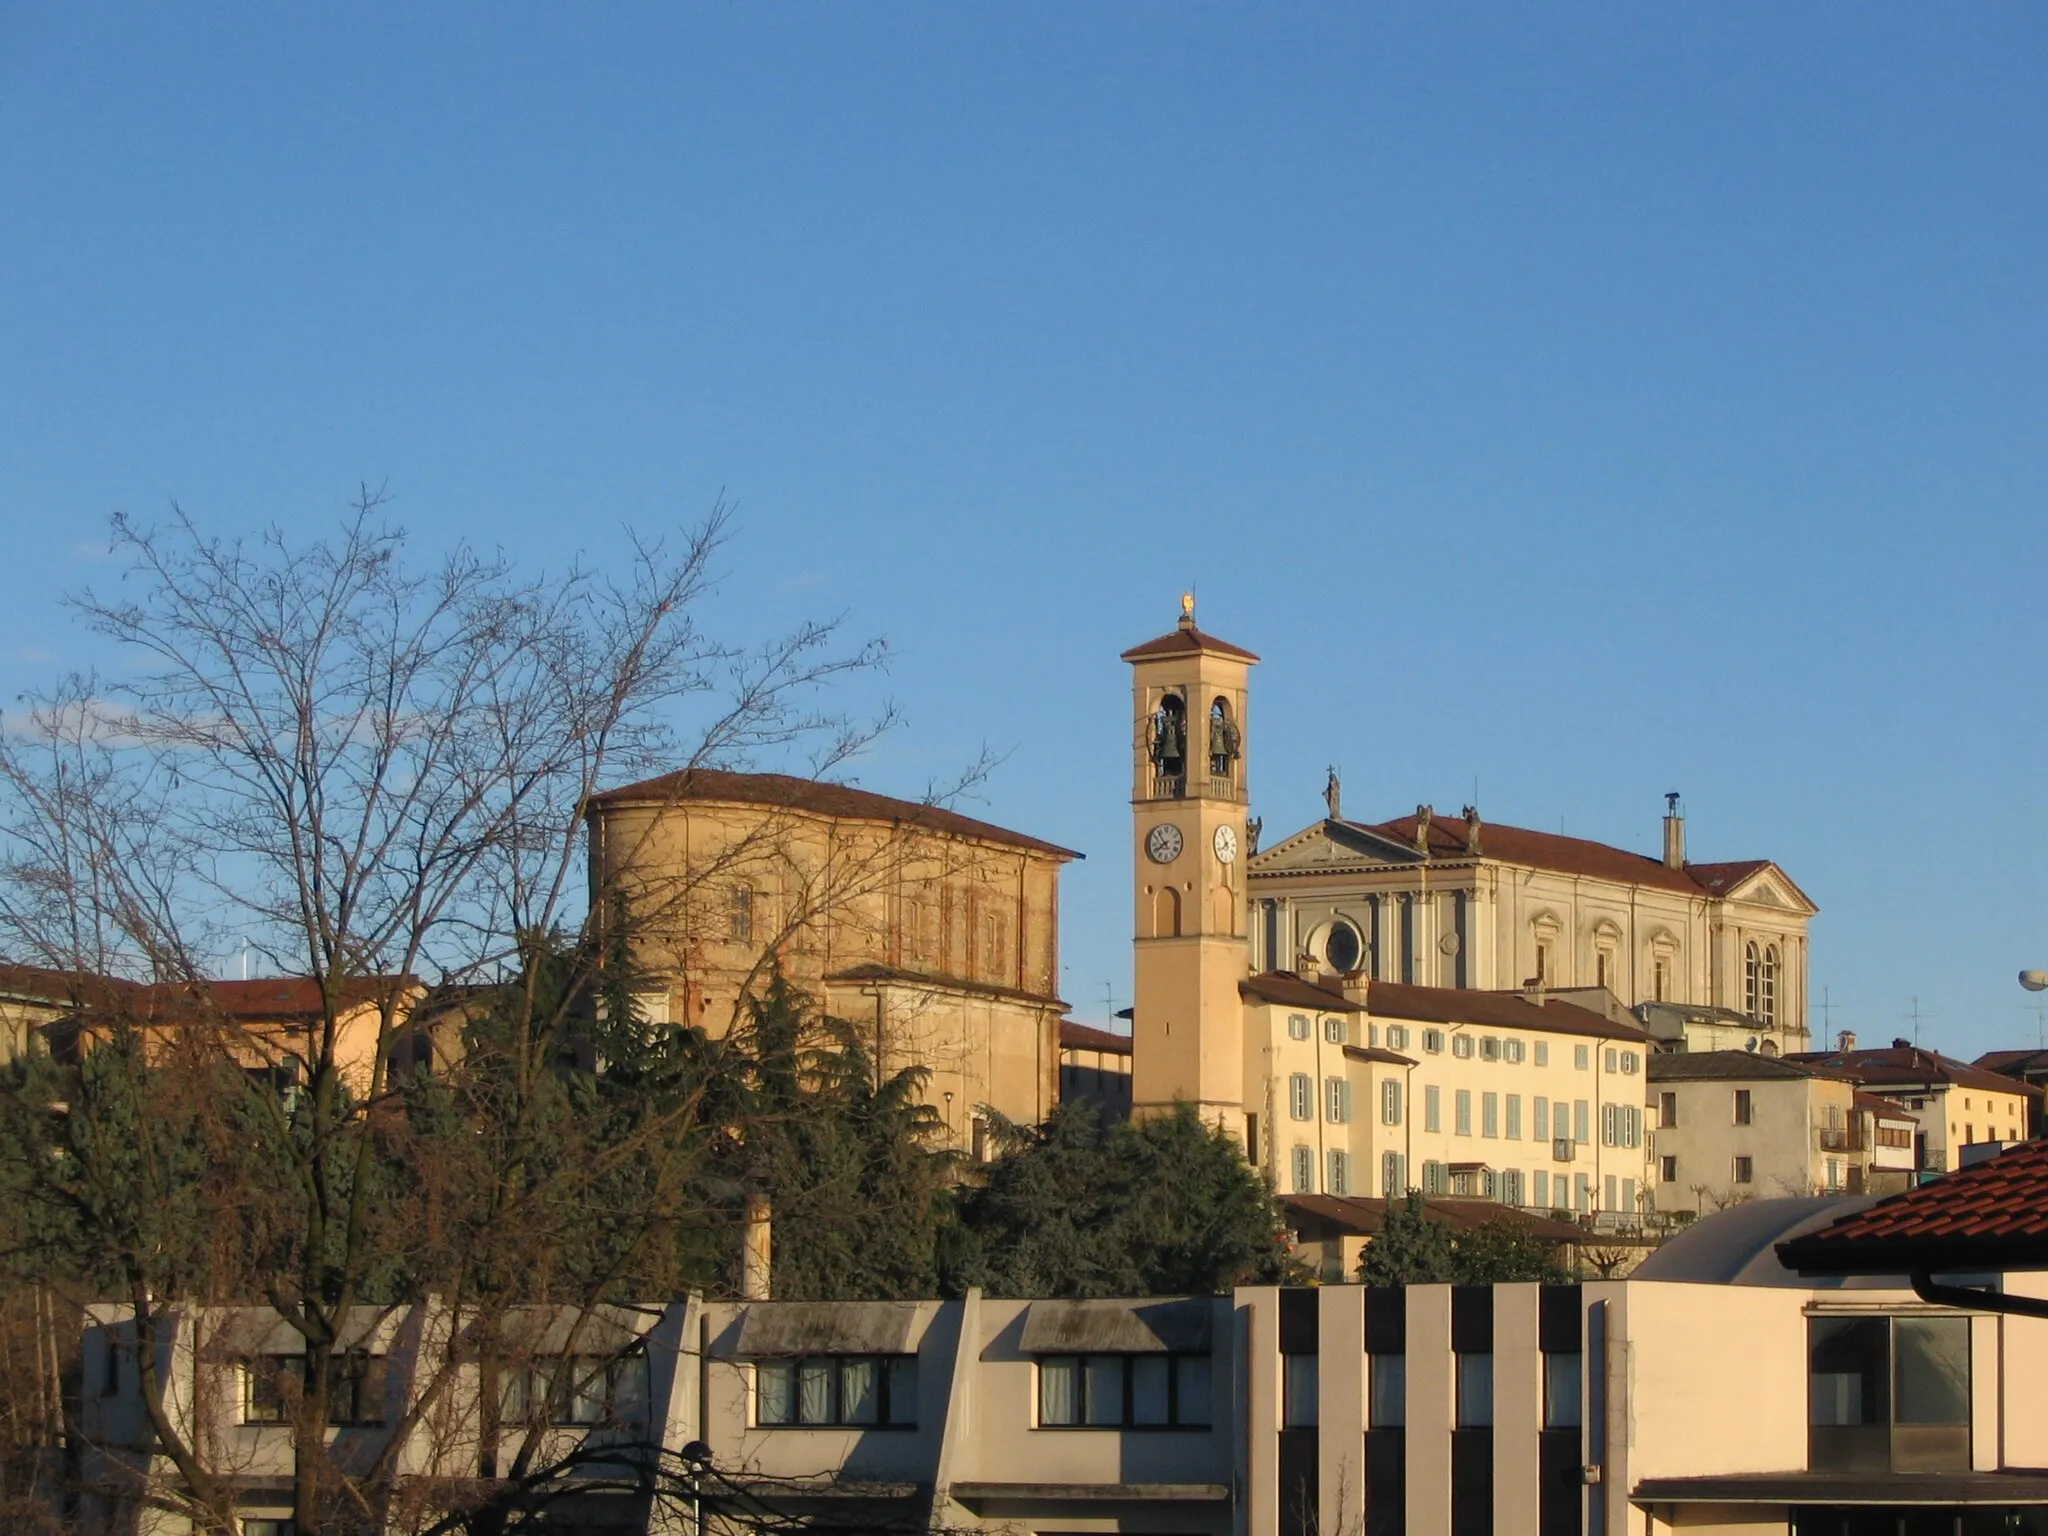 Photo showing: Chignolo d'Isola, panorama